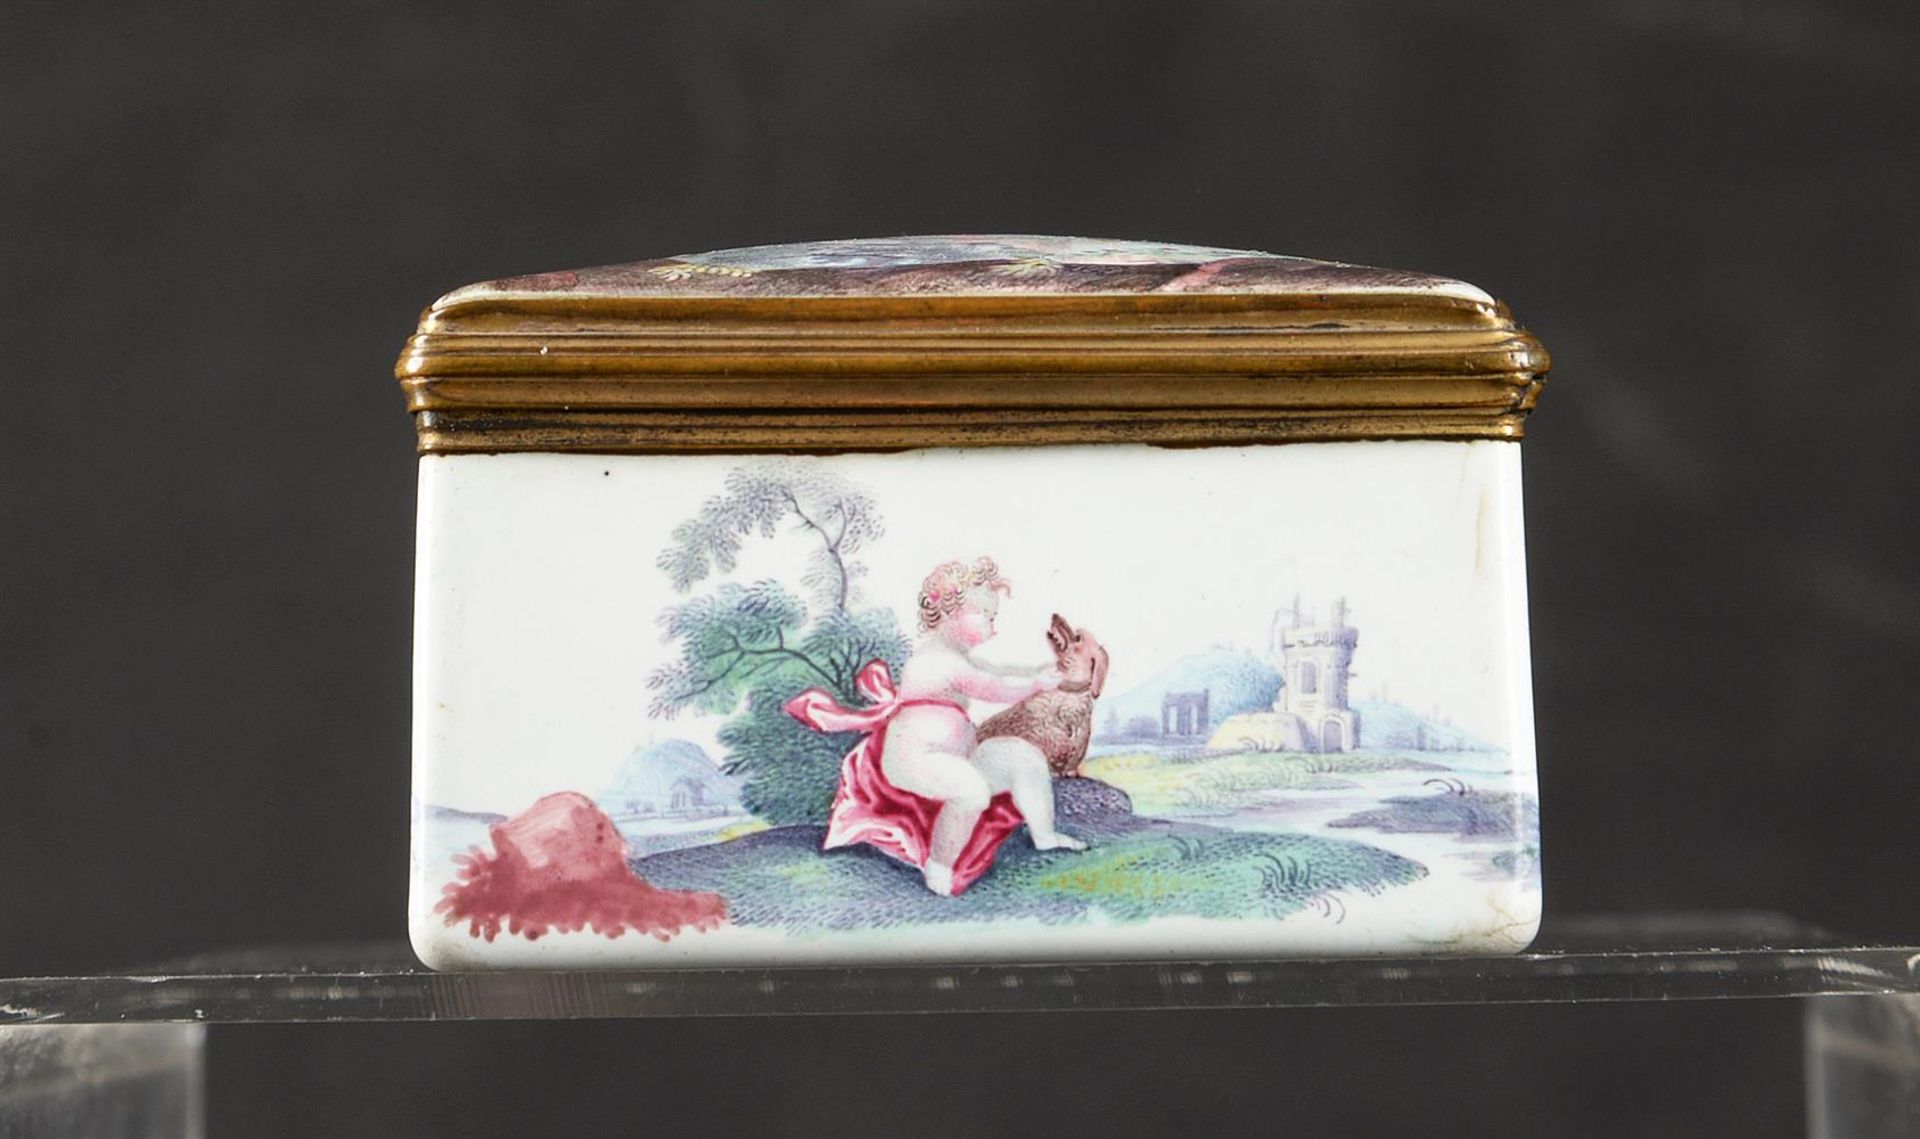 A FRENCH ENAMEL TABLE SNUFF BOX, CIRCA 1800 - Image 5 of 7